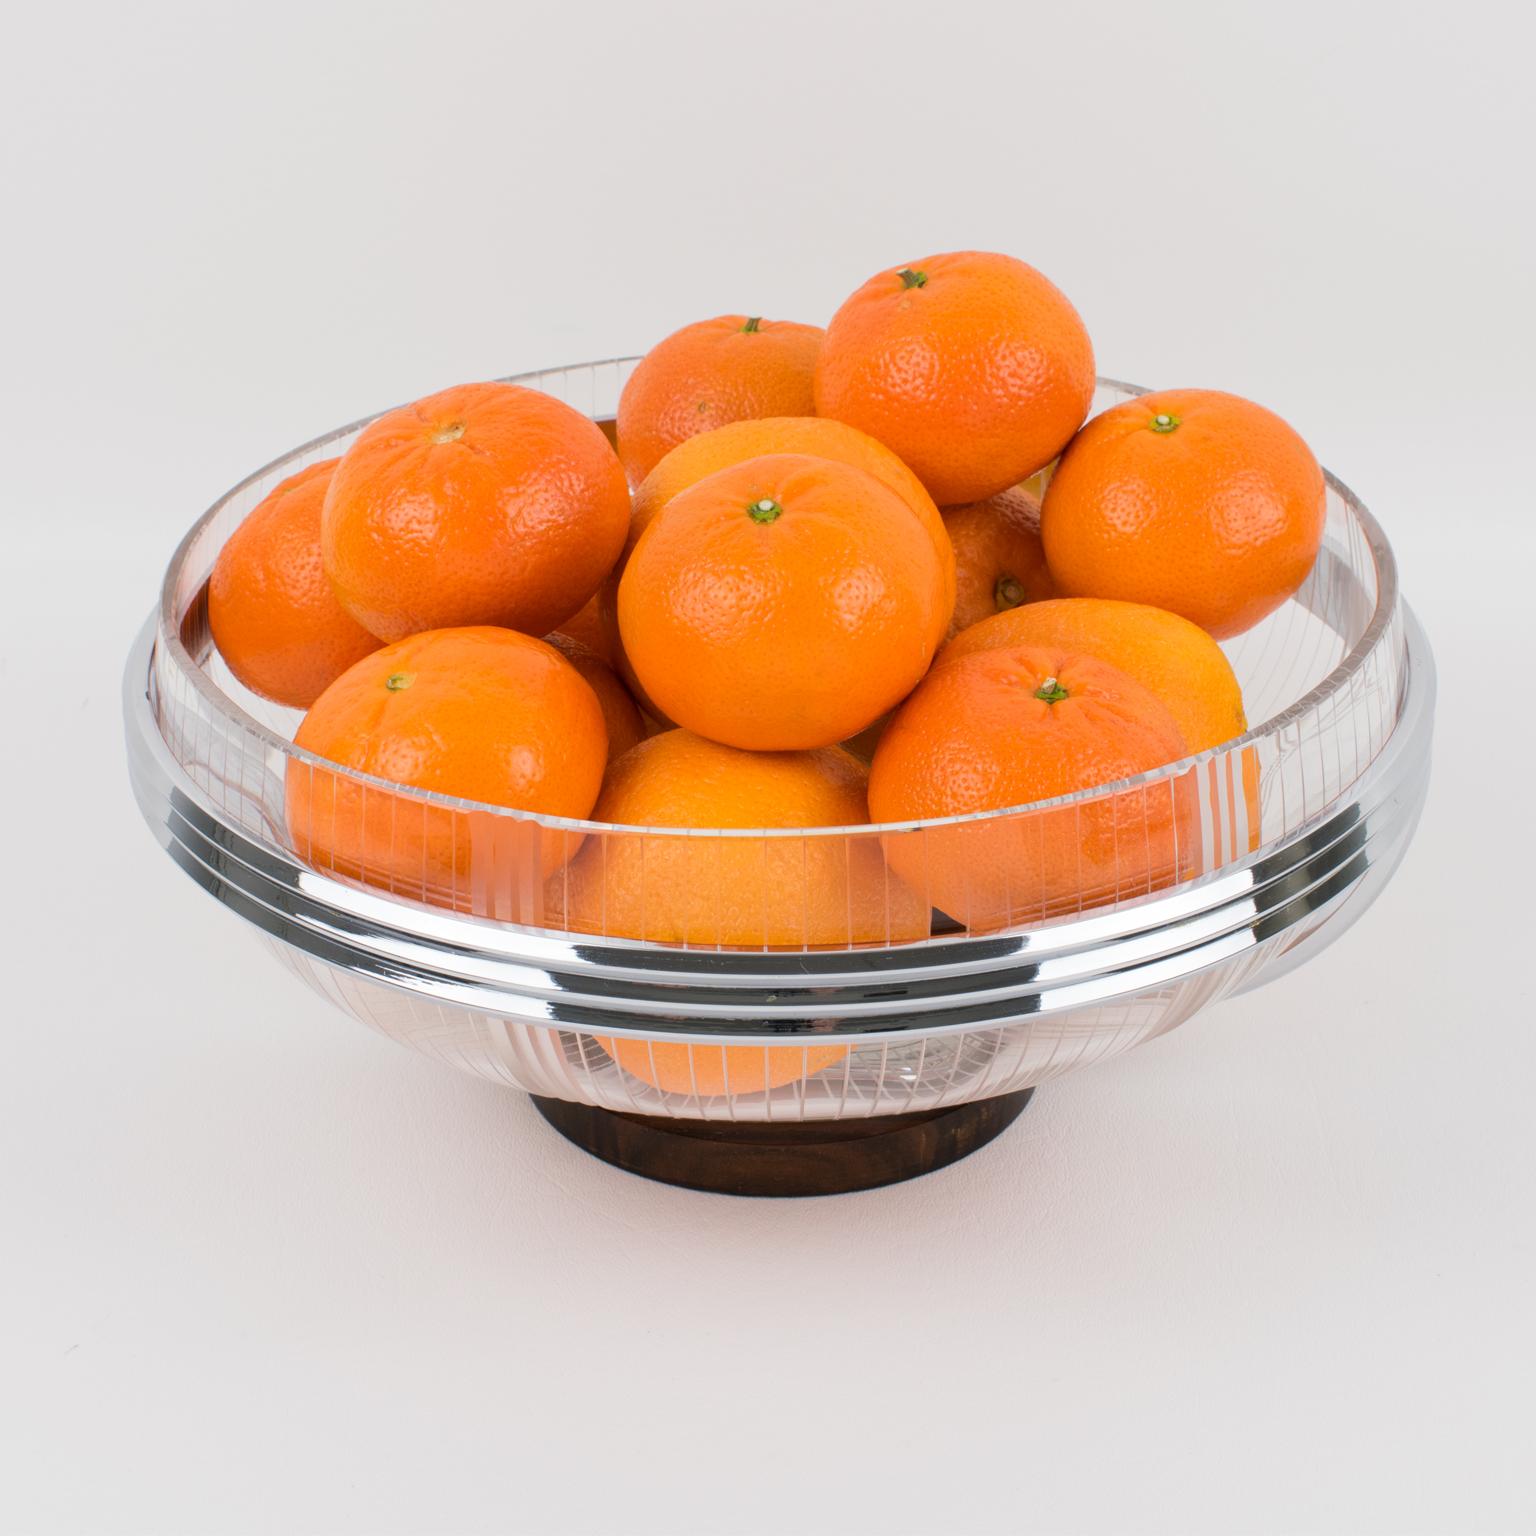 This stylish Art Deco centerpiece or serving bowl was crafted in France in the 1930s. The decorative bowl boasts a rounded shape with a Macassar wood base and a chromed metal framing. The central bowl insert is in cut crystal with beveling and